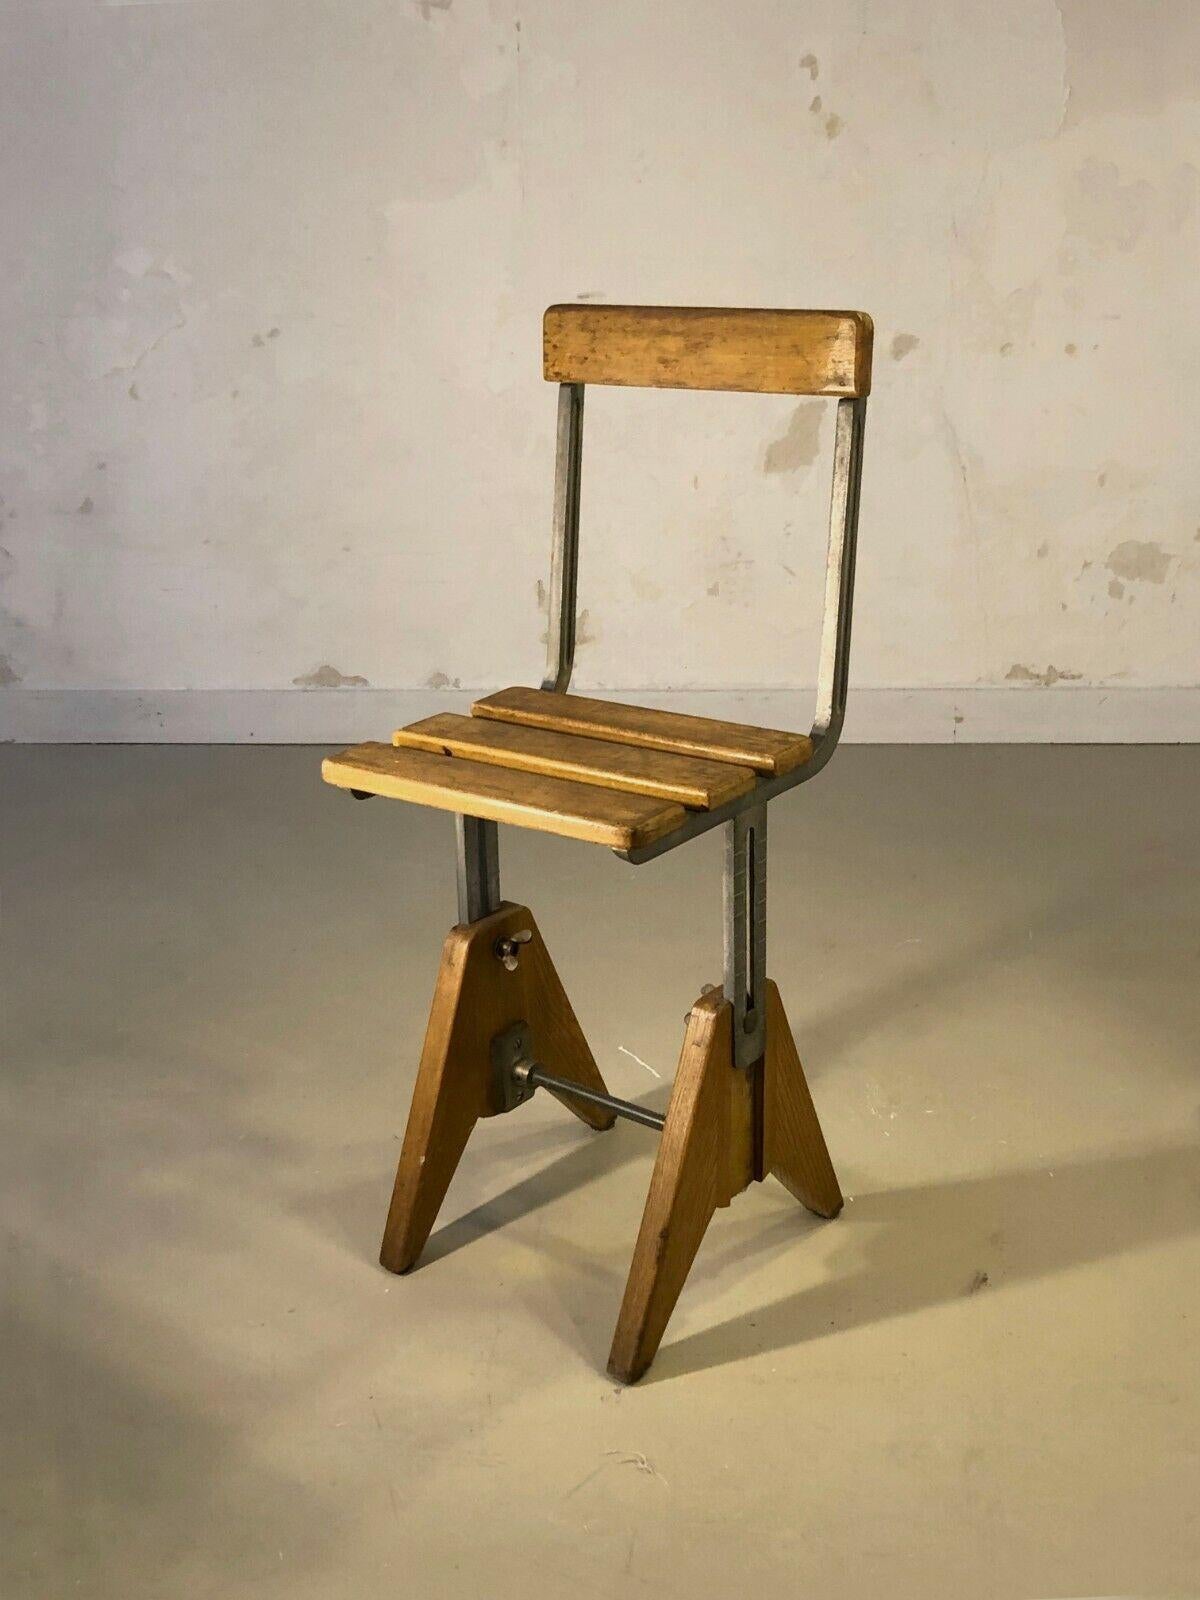 An astonishing very singular, telescopic workshop chair, Modernist, Bauhaus, Constructivist, Reconstruction, geometric structures in thick pieces of metal with telescopic system, on 2 stylized solid wood legs, solid wood seat, Ets. Levant &